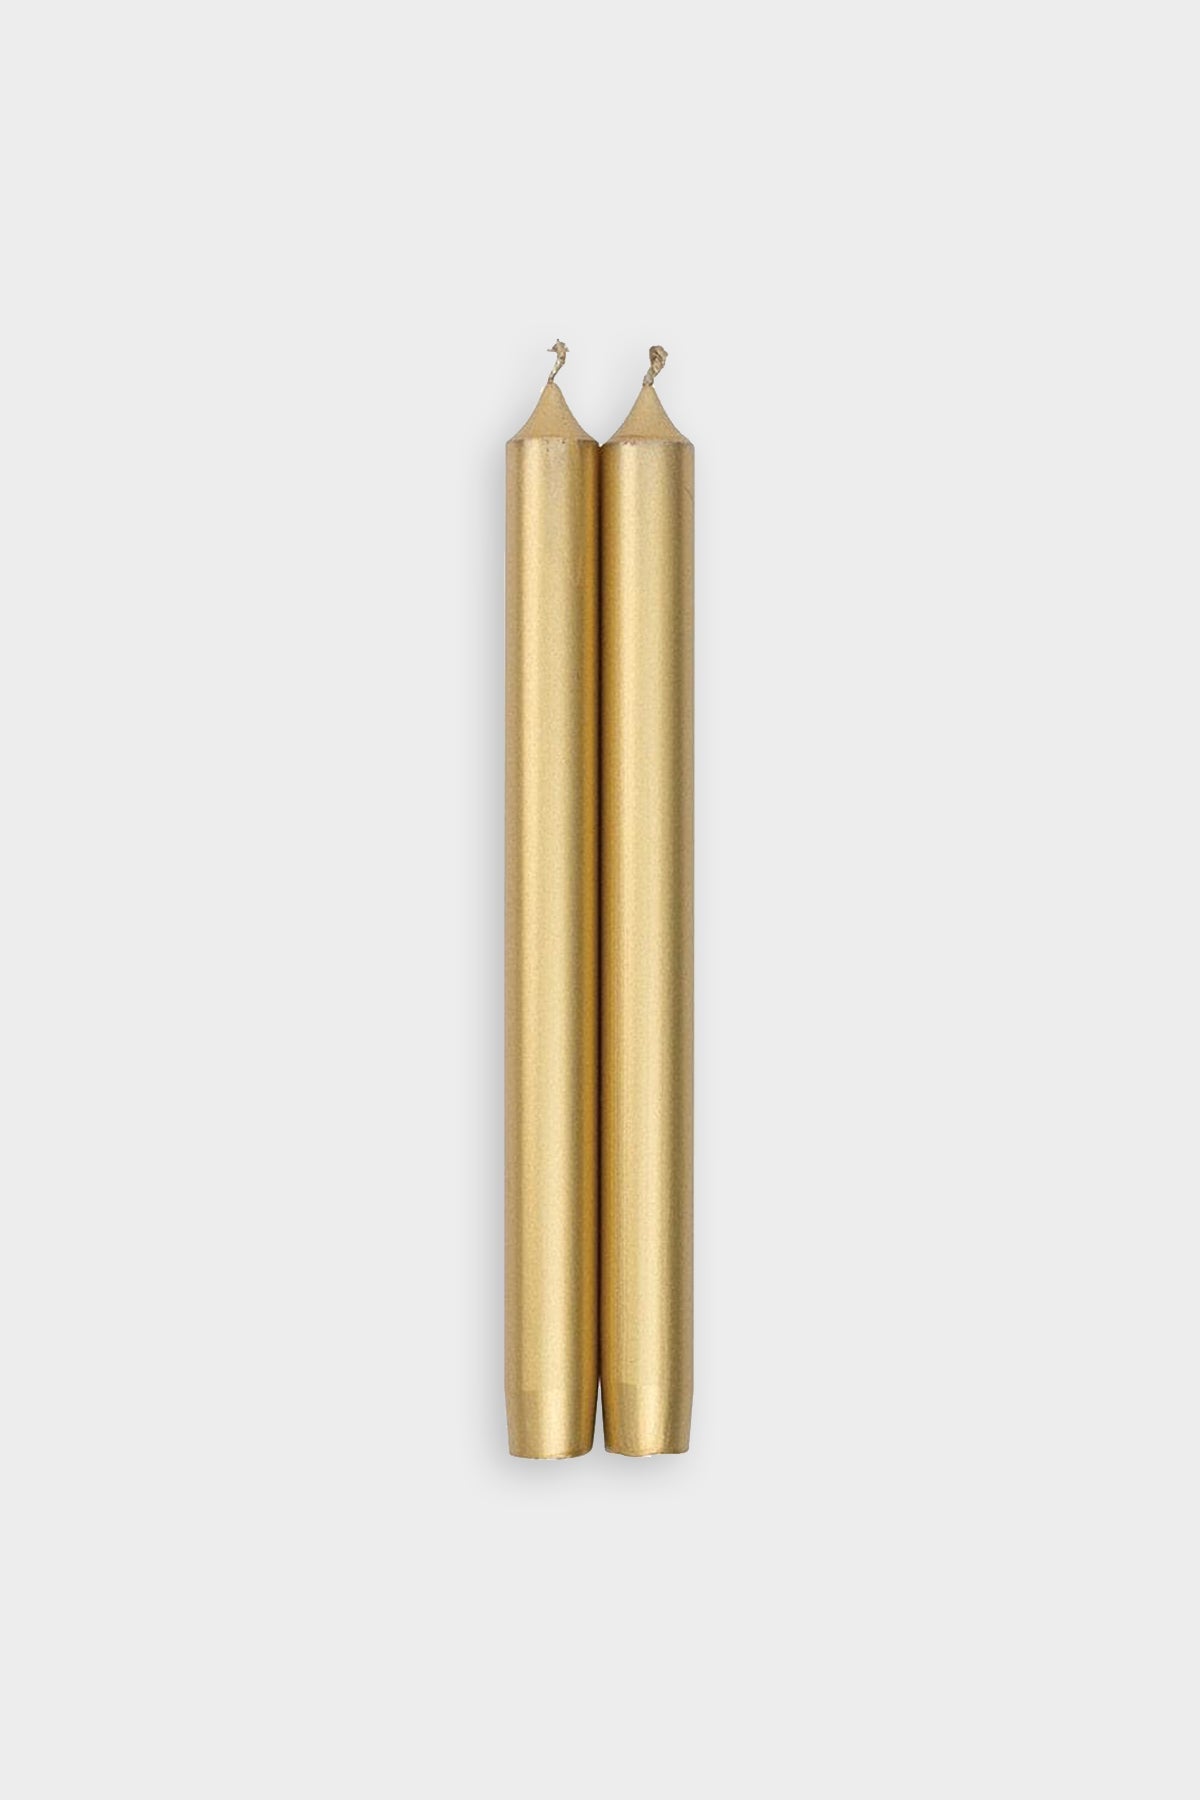 Straight Taper 12" Candles in Gold - 2 Candles Per Package - shop-olivia.com